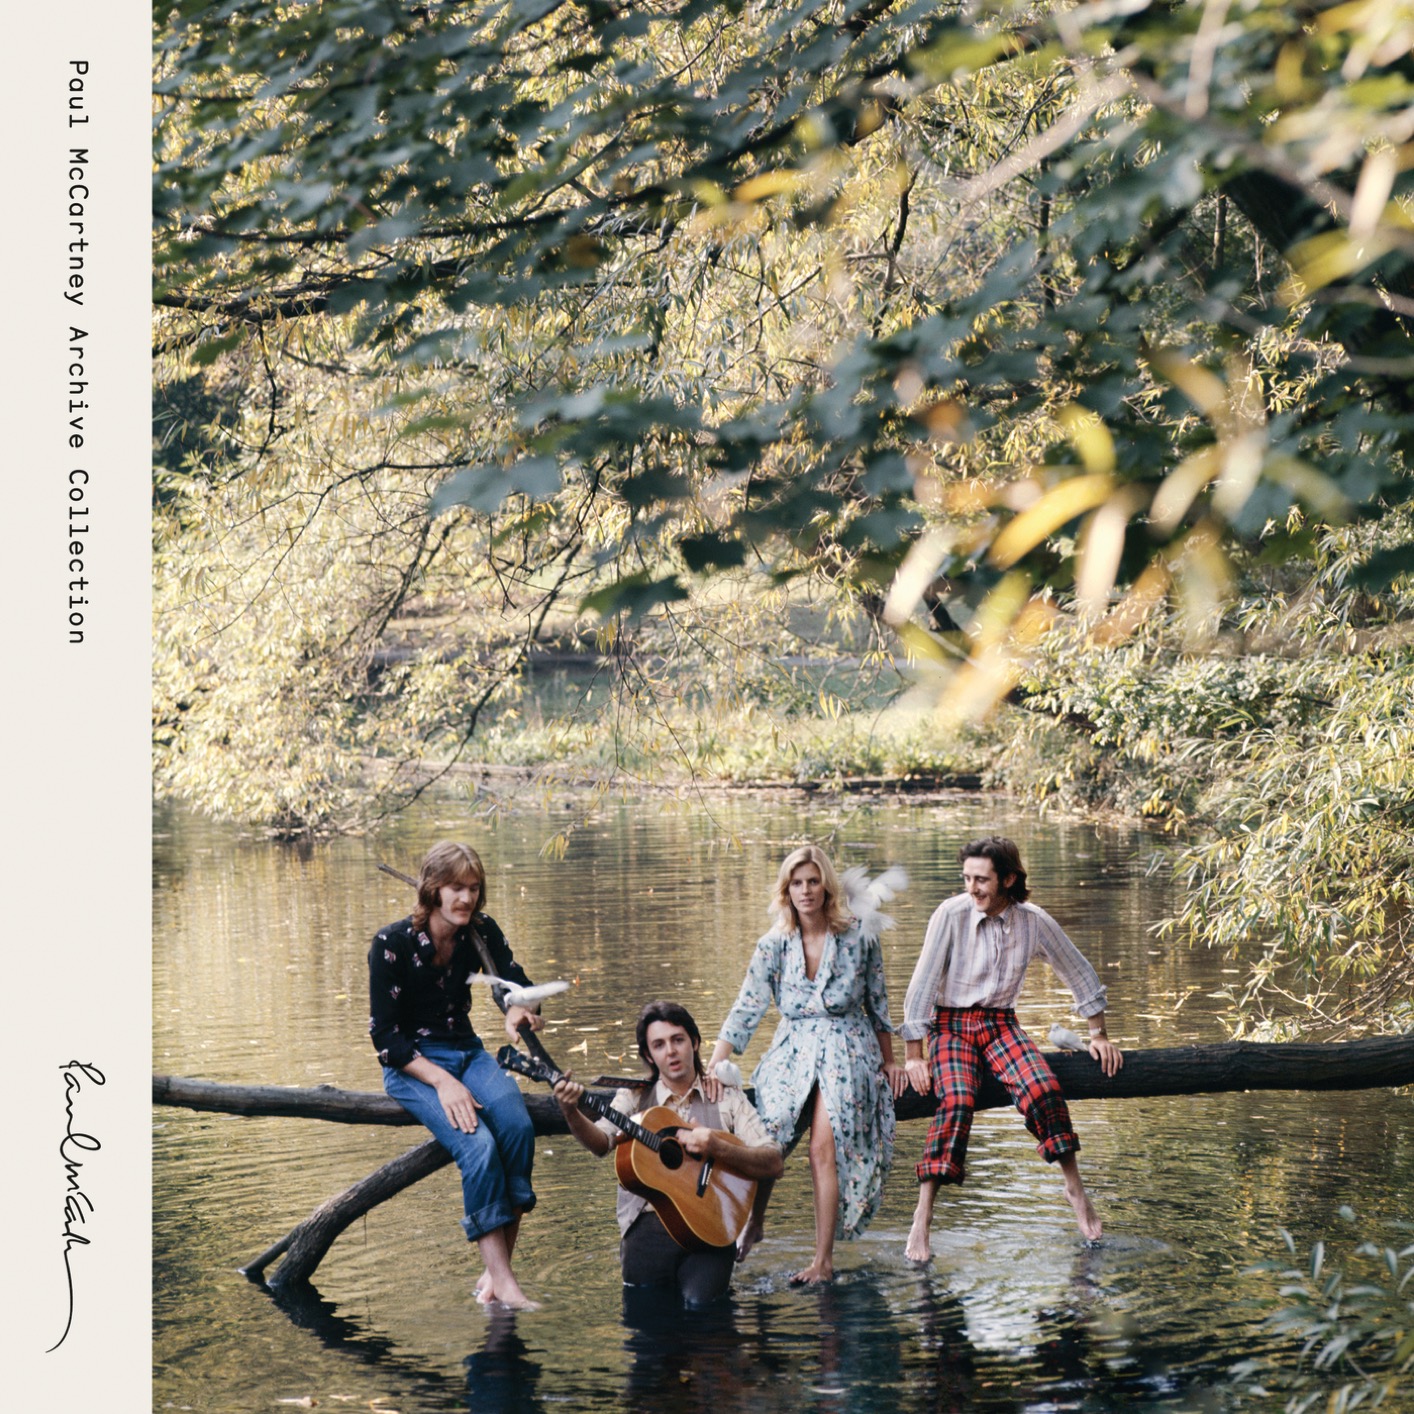 Paul McCartney & Wings – Wild Life (Special Edition) (1971/2018) [FLAC 24bit/96kHz]